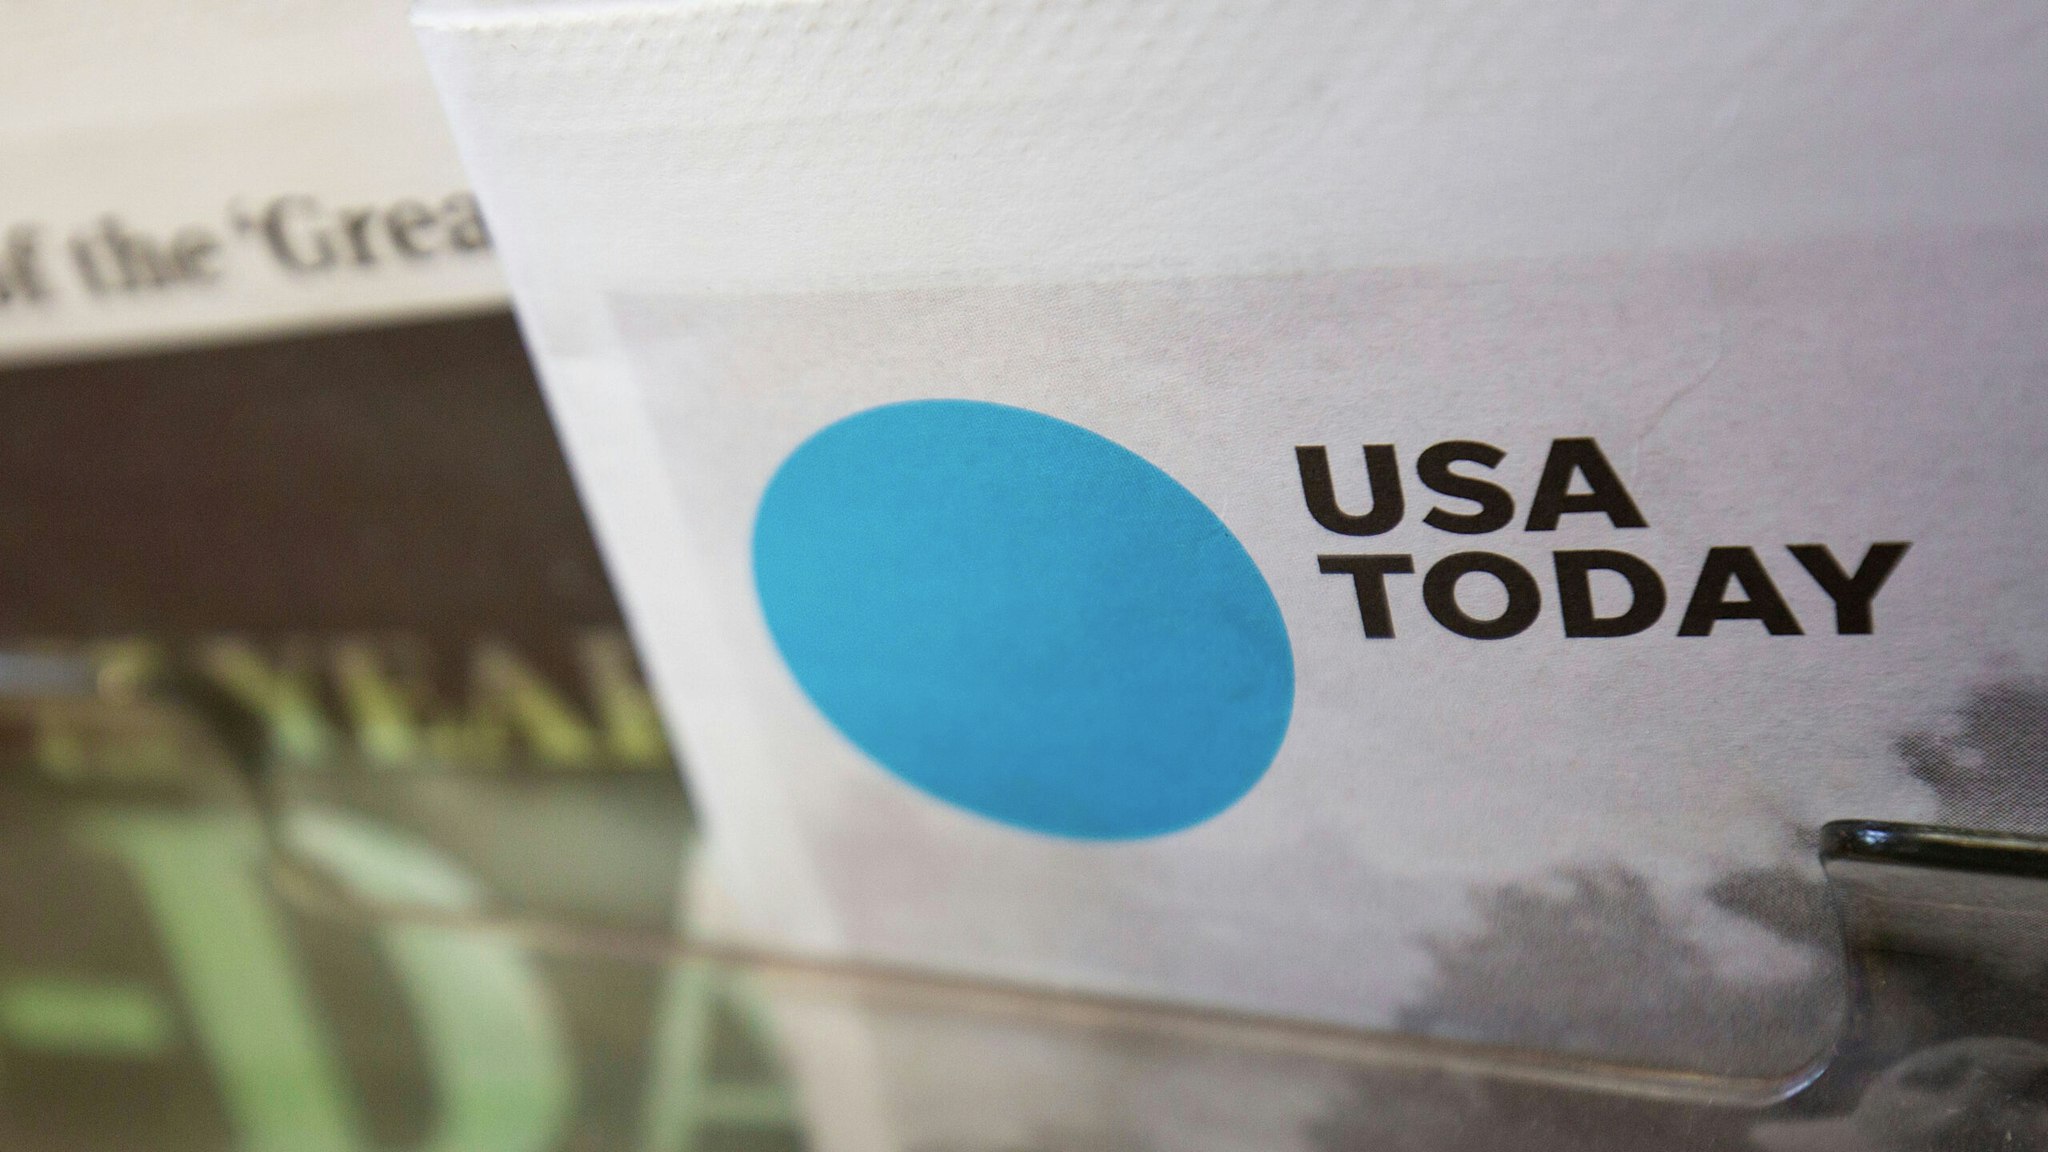 The front page of a special edition USA Today newspaper is seen at a convenience store in Washington, DC, on August 6, 2019.